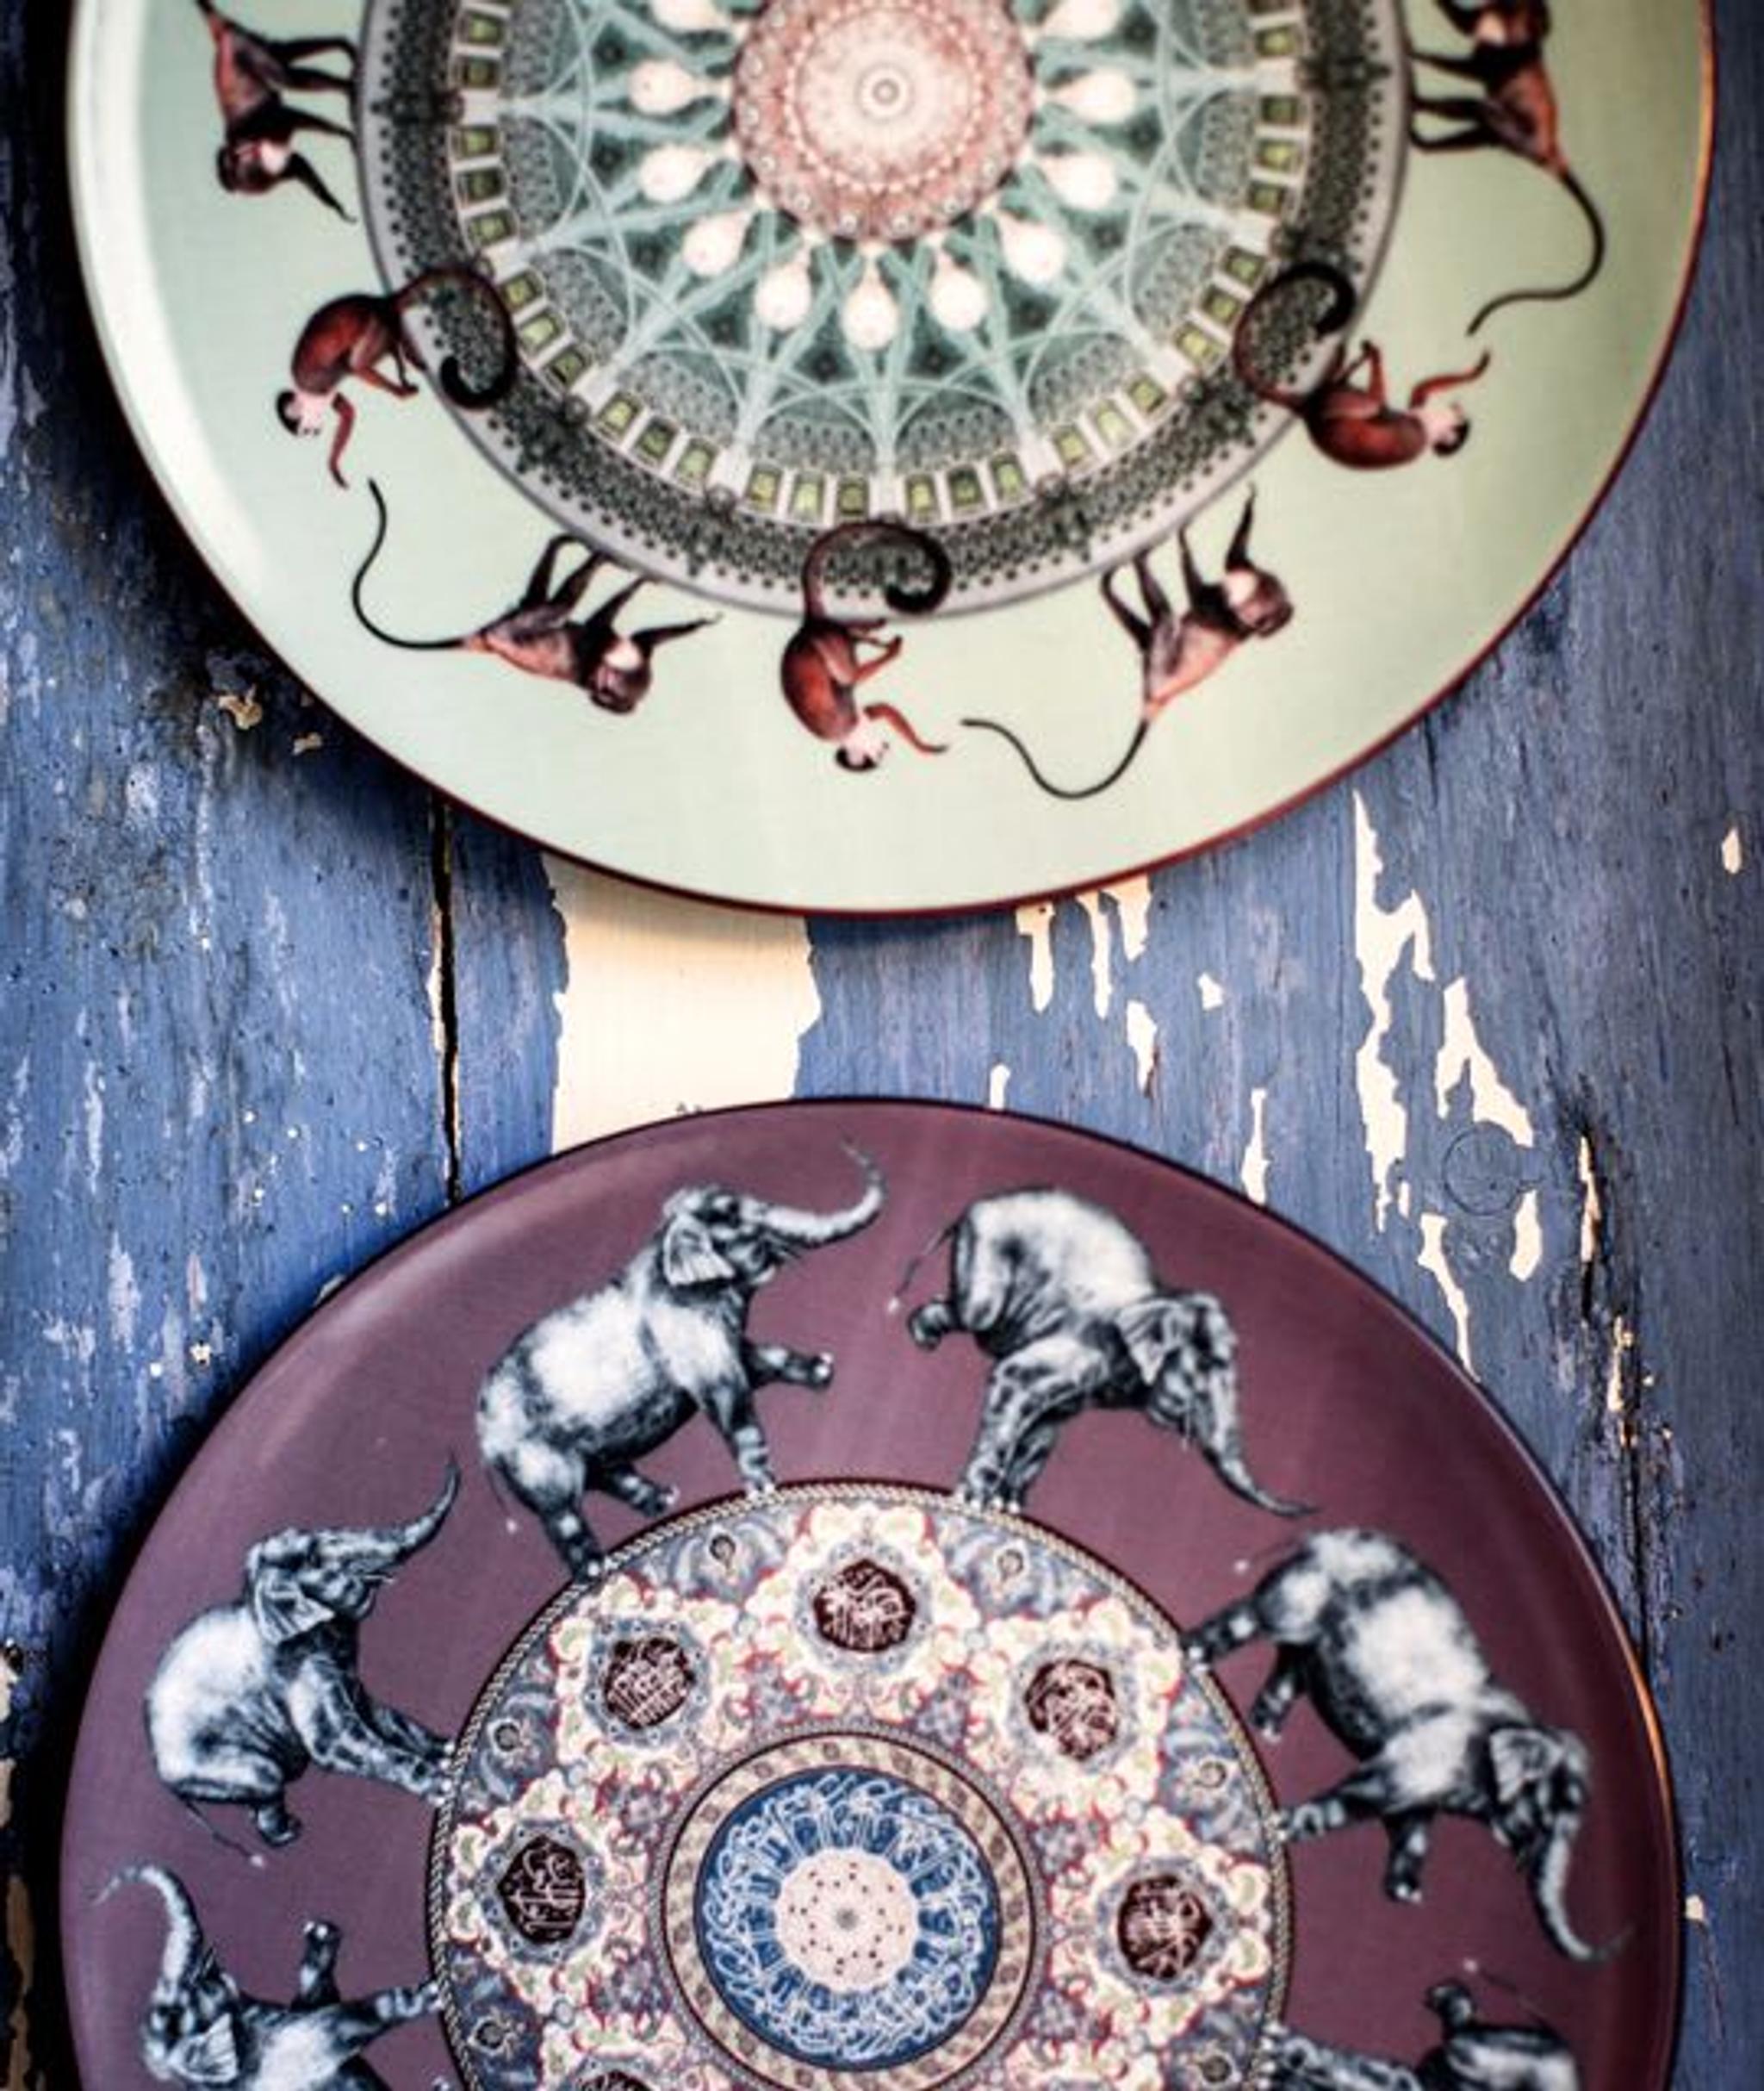 Constantinople Porcelain Plates by Vito Nesta for Les Ottomans.